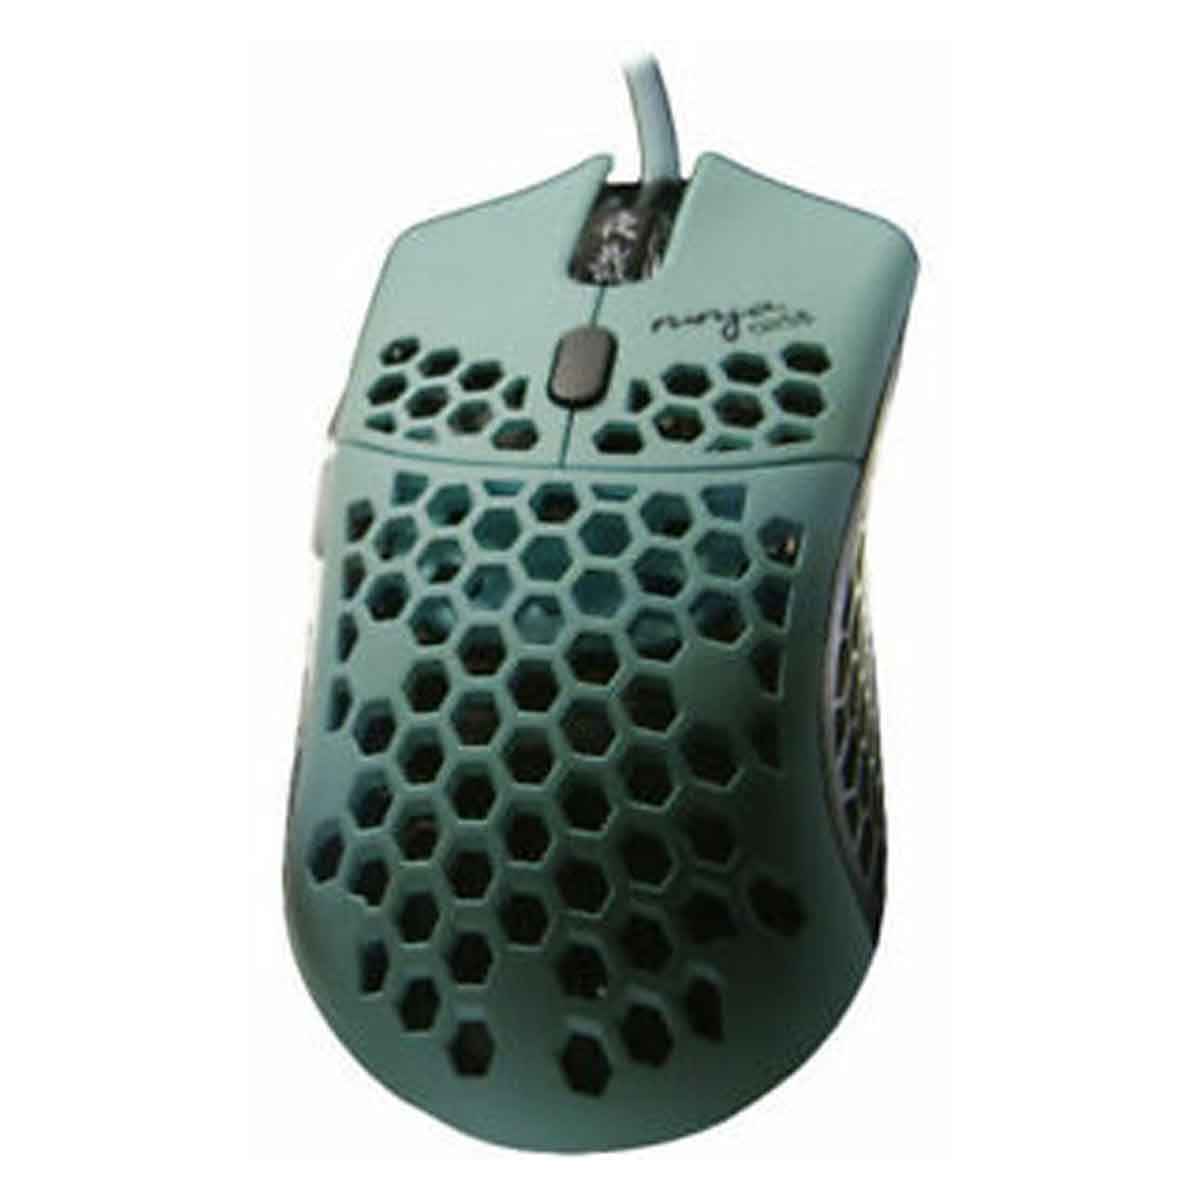 Finalmouse Air58 Ninja Gaming mouse PC Components Price in India